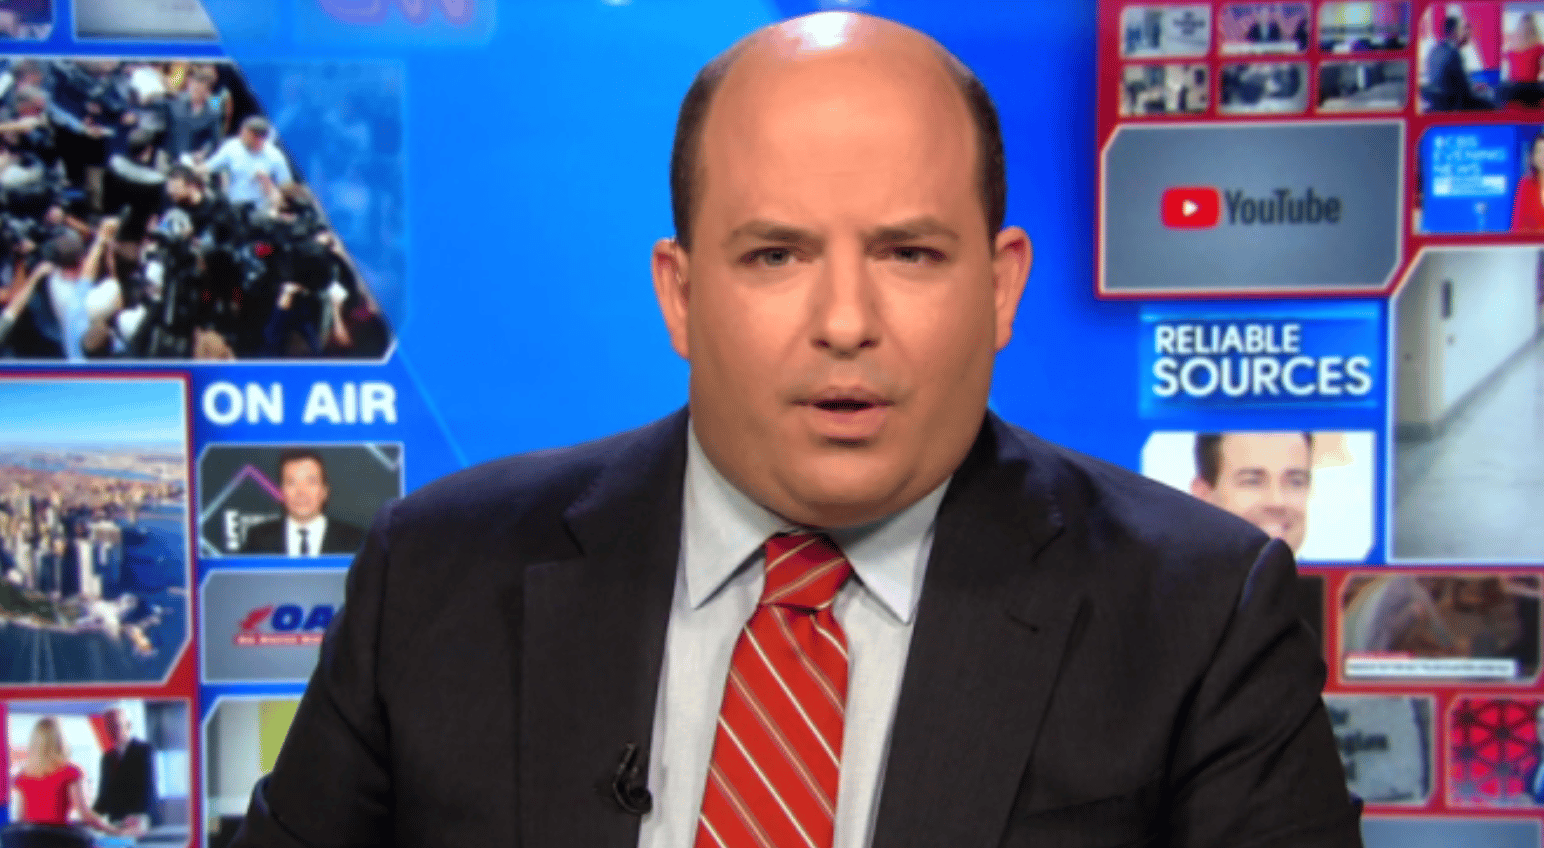 Brian Stelter To Leave CNN As Network Drops ‘Reliable Sources’